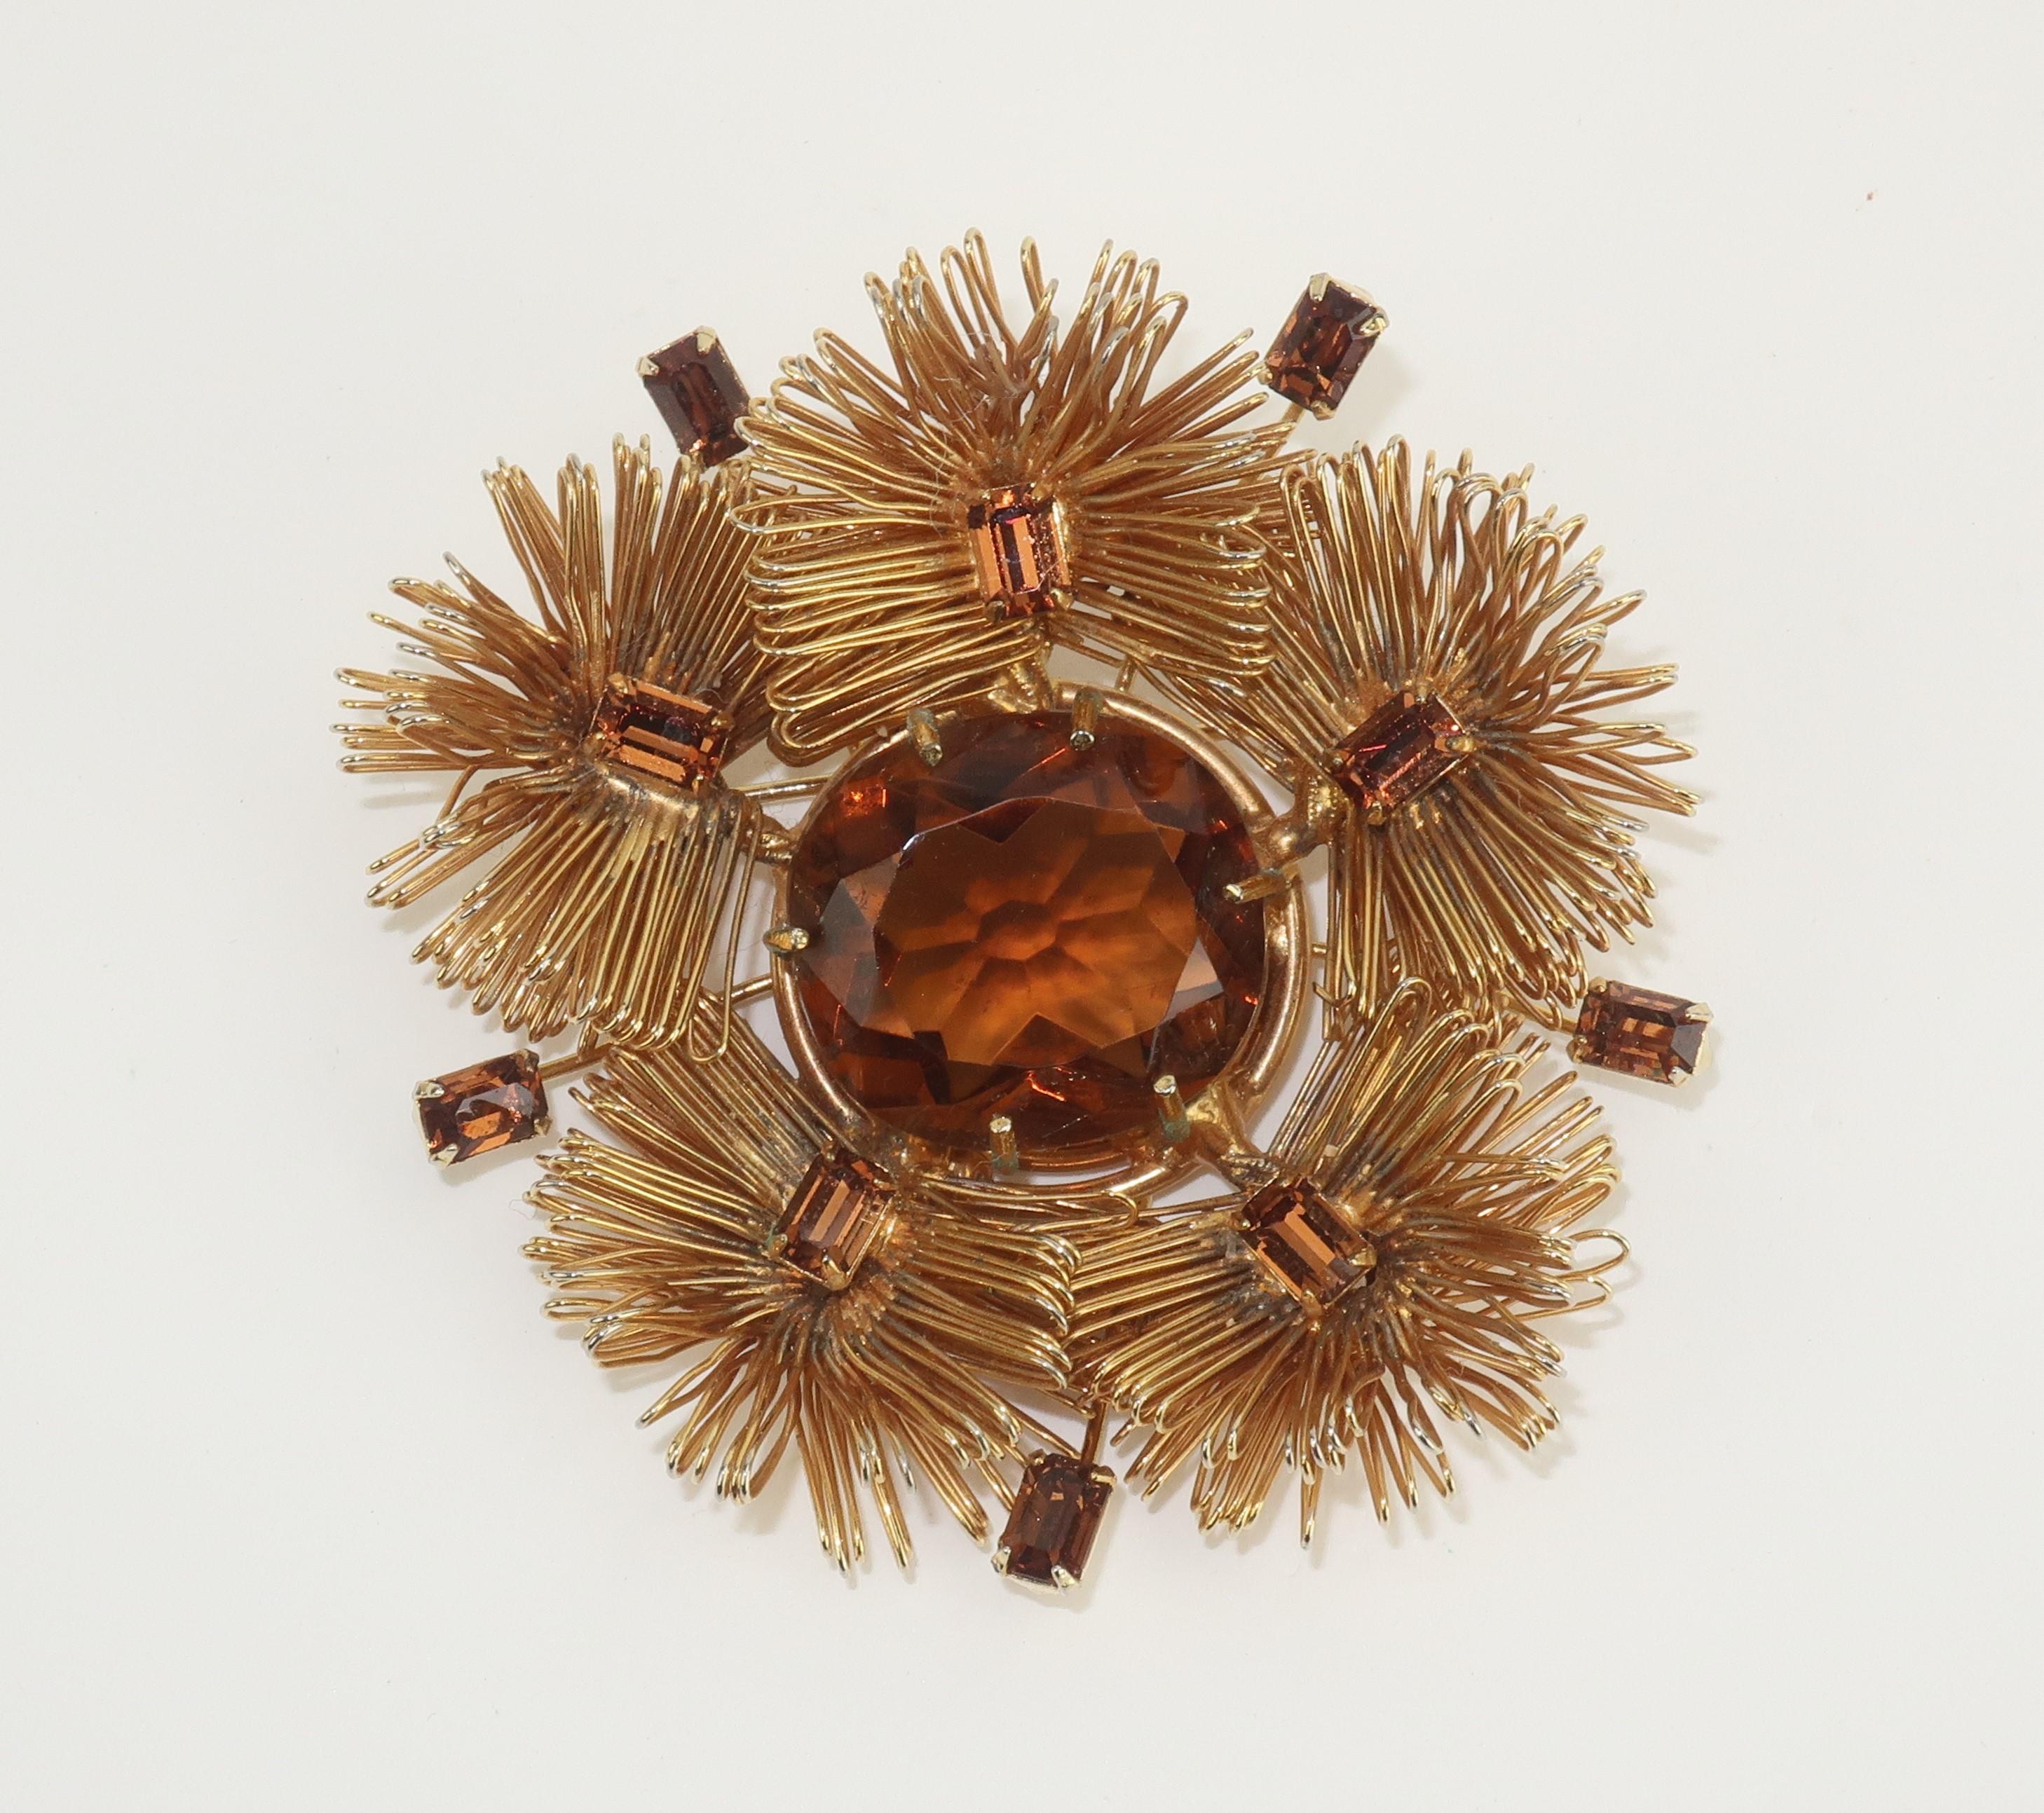 Beautiful gold tone brooch embellished with brown topaz colored crystals in the form of an abstract pinecone bloom.  The intricate design utilizes looped wiring which creates a feathery look perfect for embellishing Fall and Winter lapels. 